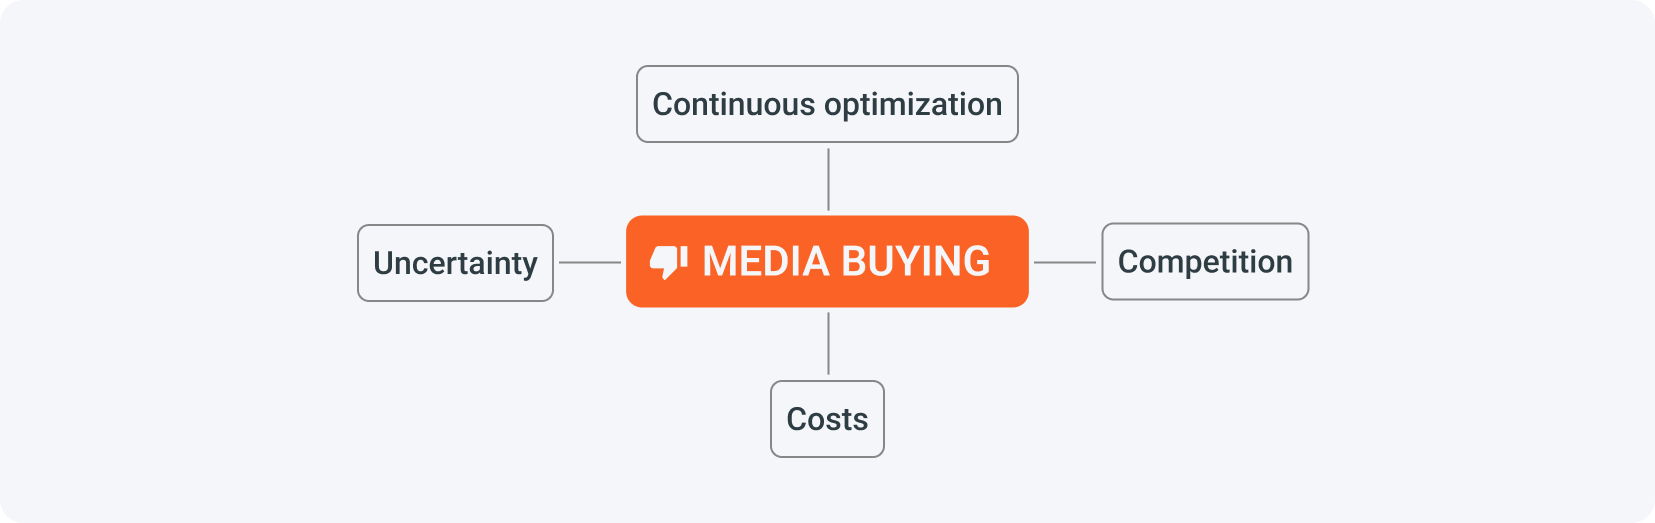 Disadvantages of media buying include its costs, uncertainty of results, the need for continuous optimization, and high competition.